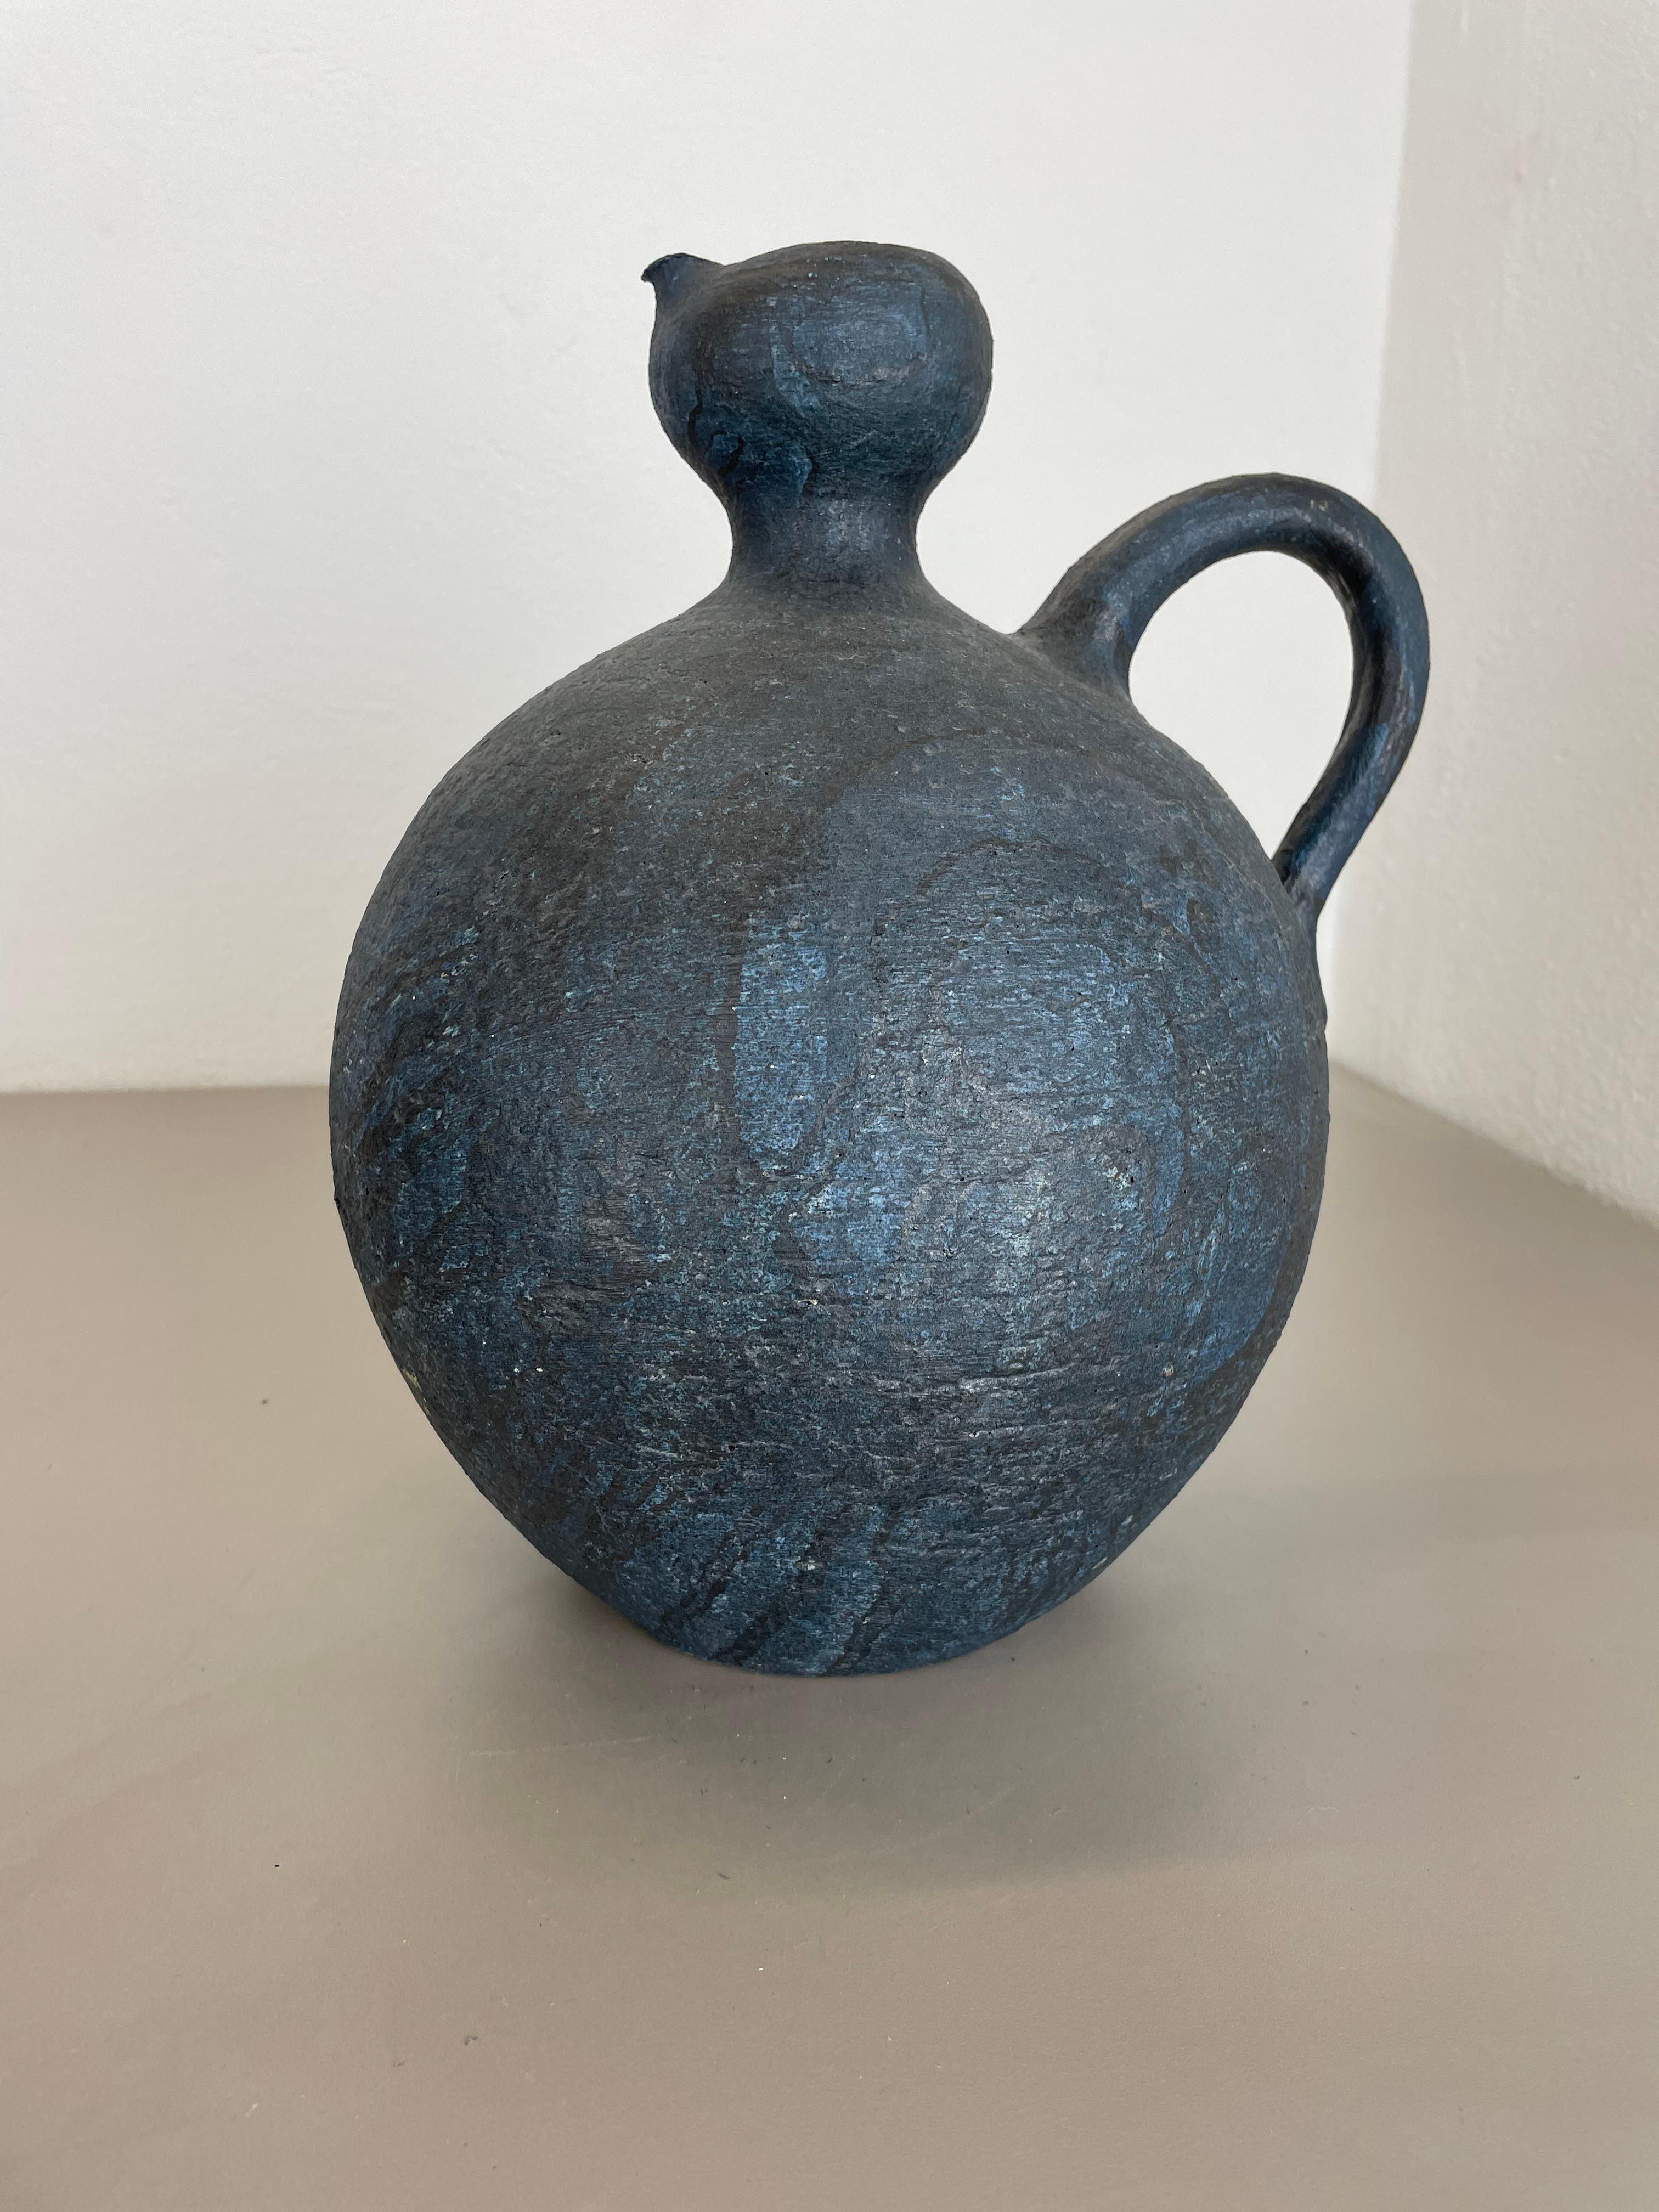 Abstract 31cm Ceramic Studio Pottery Object, Gerhard Liebenthron, Germany, 1981 For Sale 9